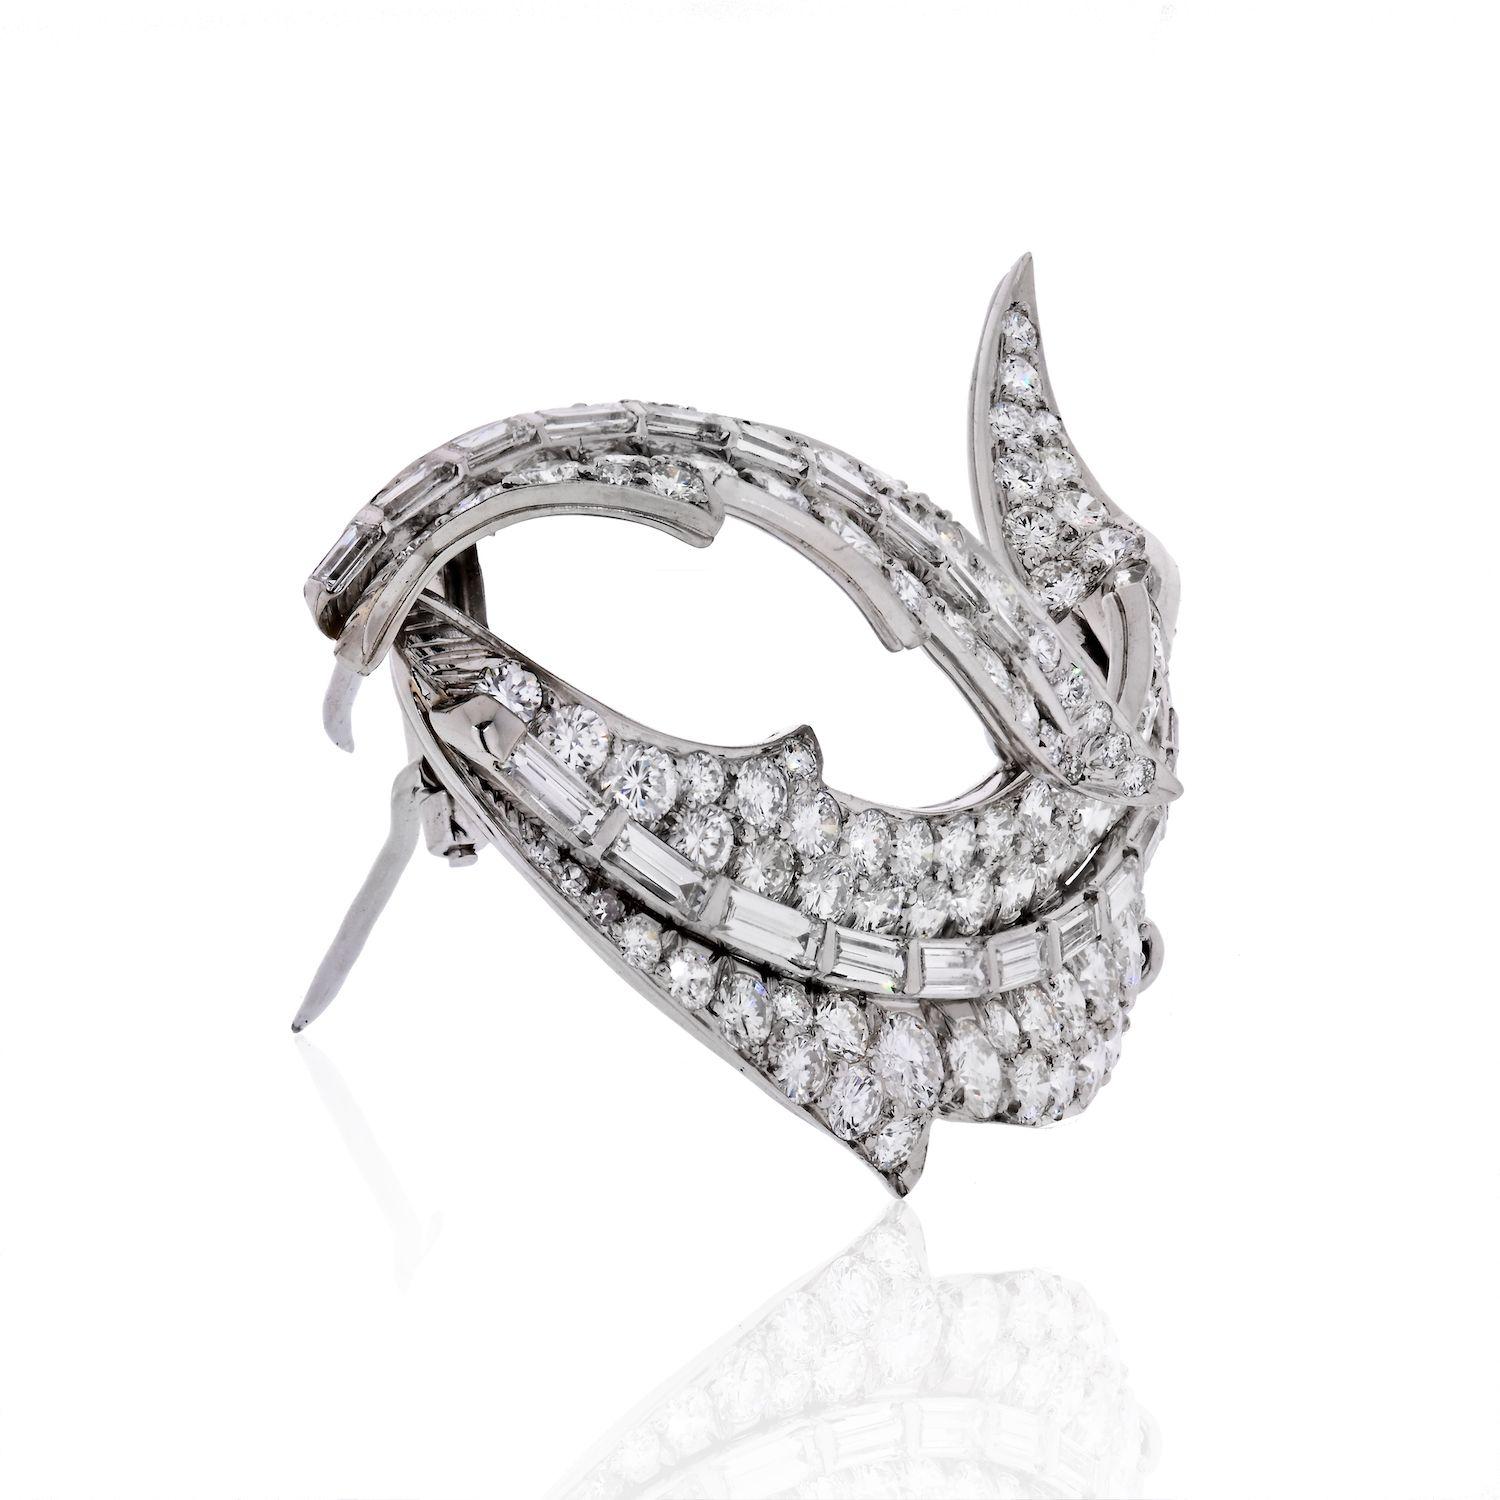 David Webb diamond swirl brooch crafted in Platinuma, mounted with round cuts and baguettes of exceptional quality. 
This brooch measures 58mm long. 
